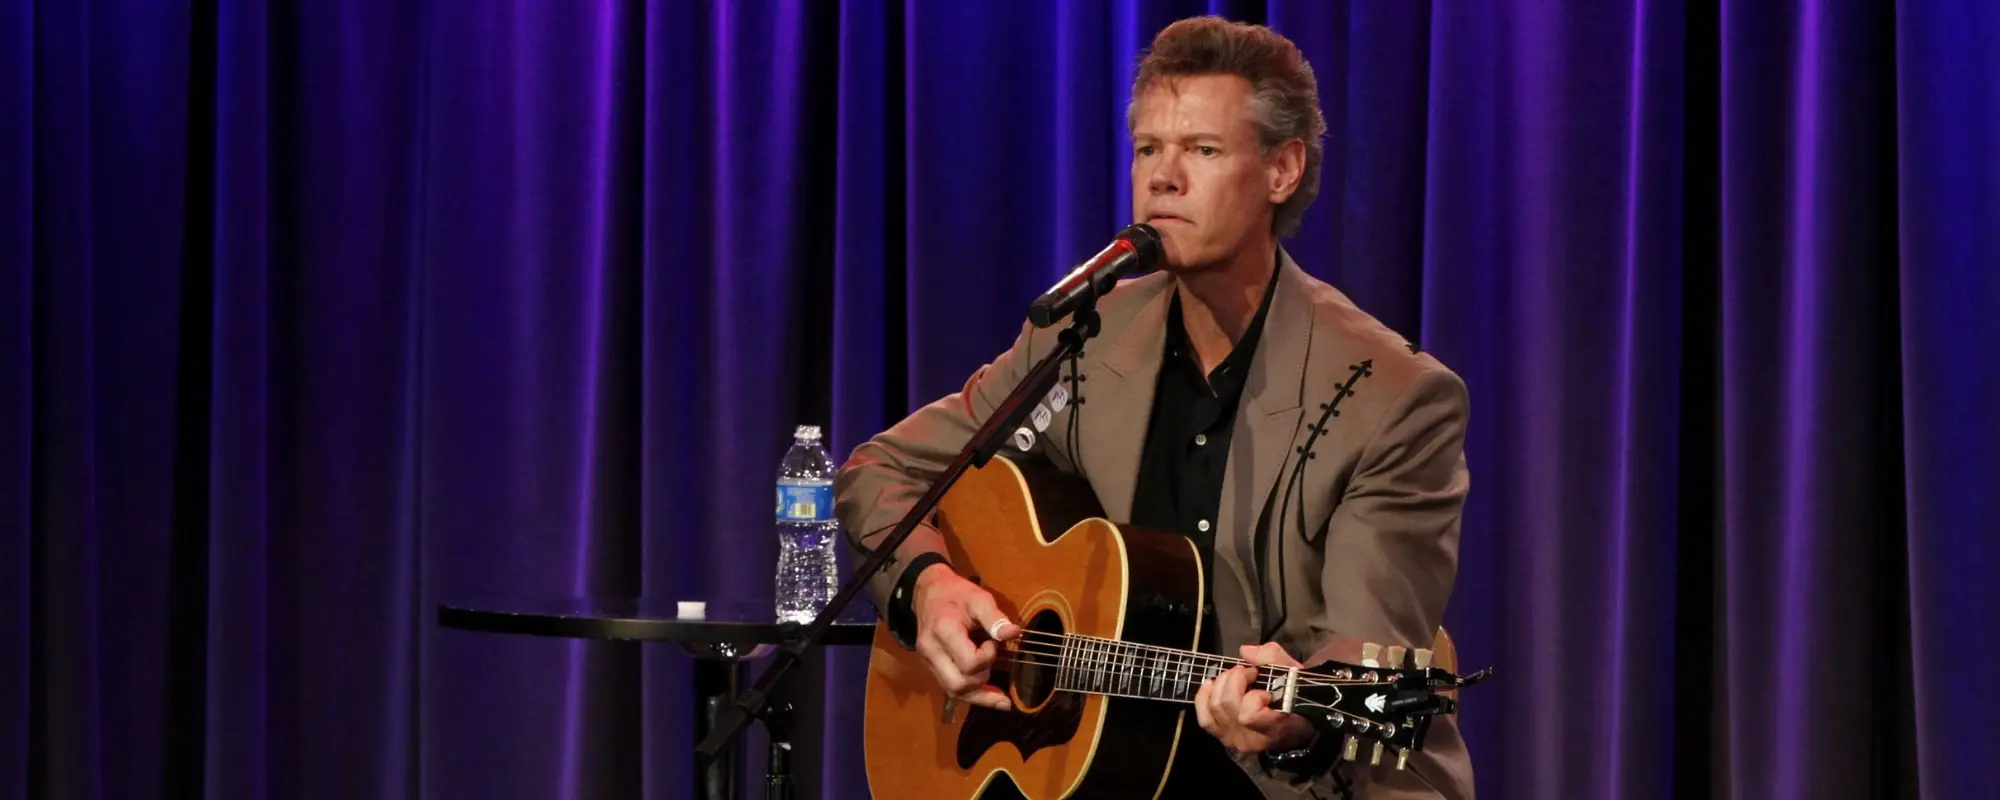 3 Timeless Randy Travis Songs Every Country Music Fan Should Know by Heart